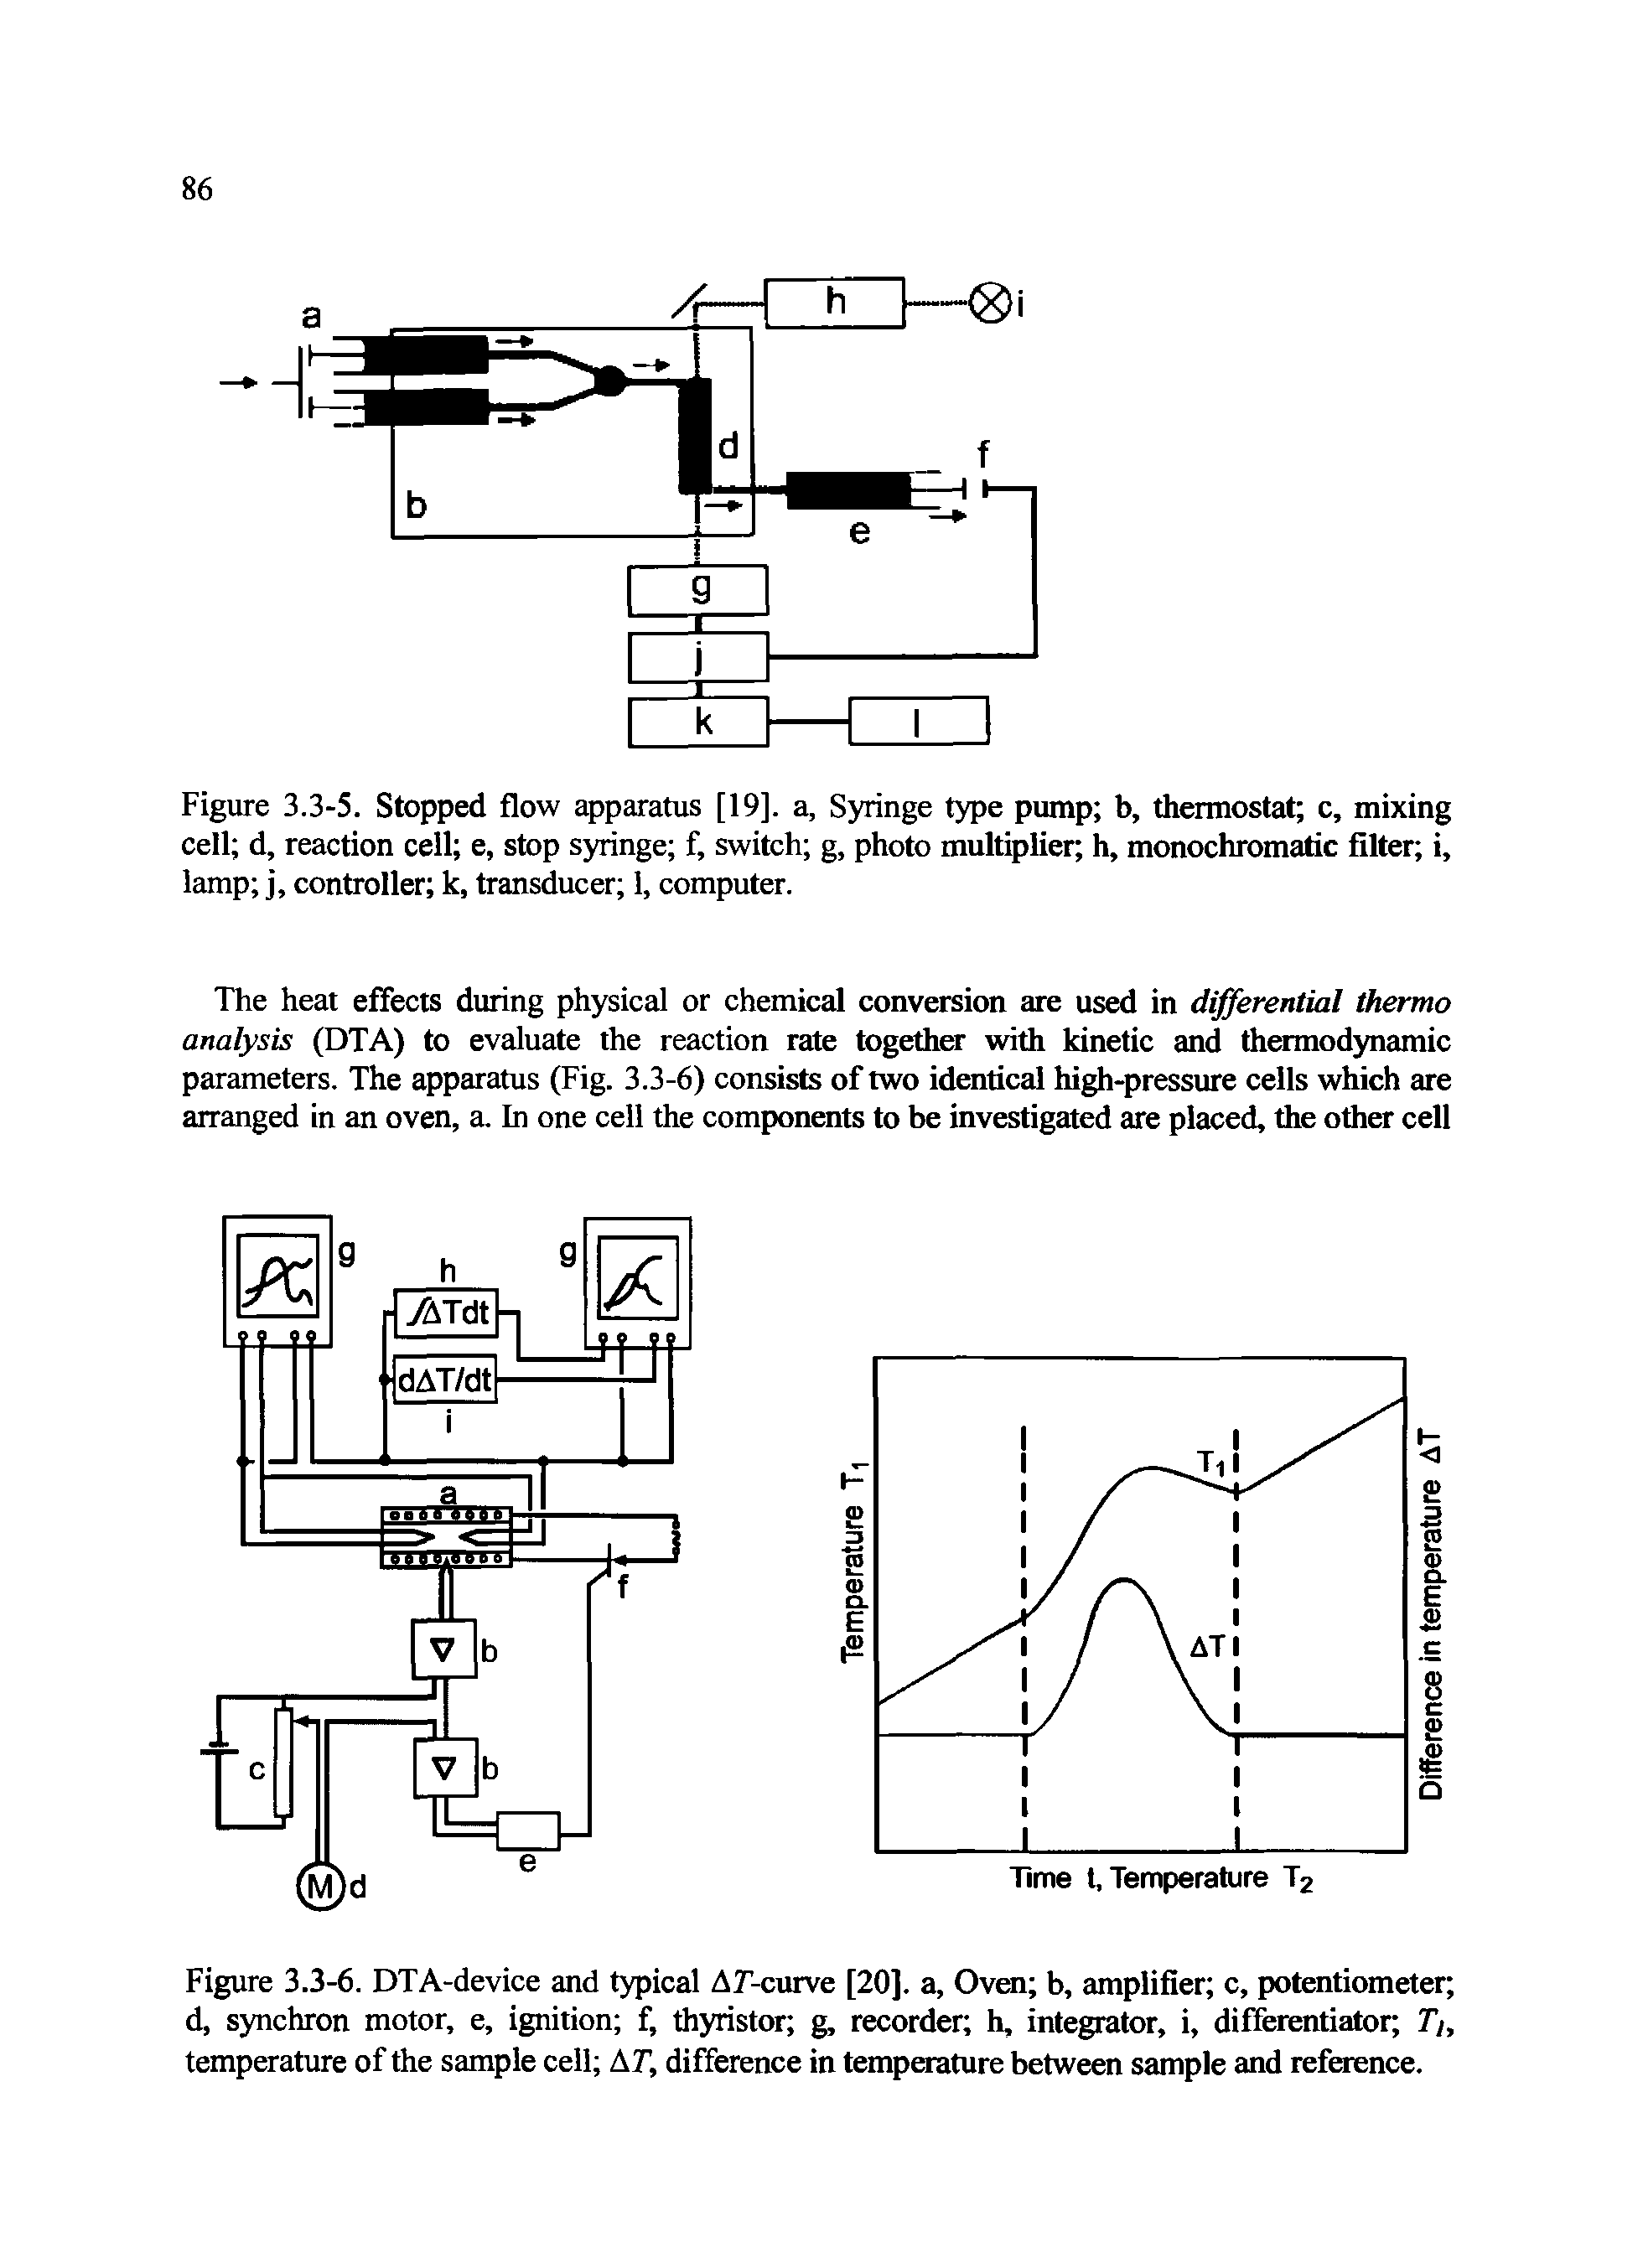 Figure 3.3-5. Stopped flow apparatus [19]. a, Syringe type pump b, thermostat c, mixing cell d, reaction cell e, stop syringe f, switch g, photo multiplier h, monochromatic filter i, lamp j, controller k, transducer 1, computer.